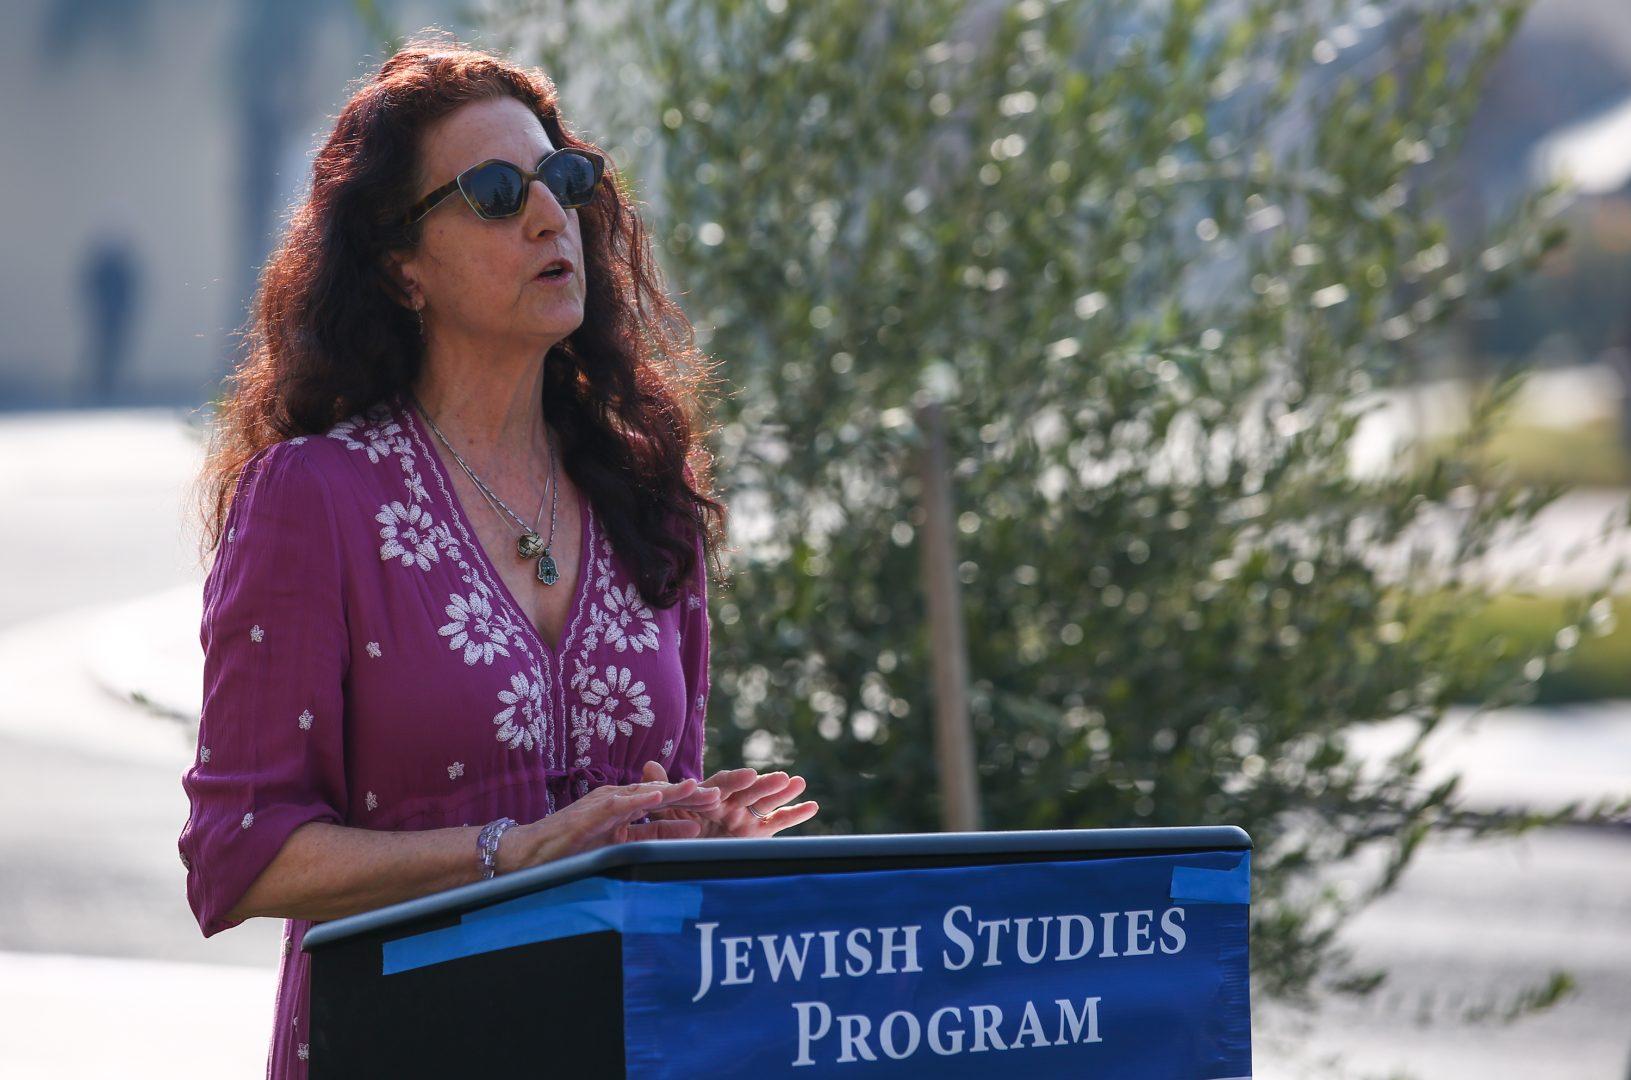 Professor+of+History%2C+Jill+Fields+speaks+to+a+crowd+of+students+and+faculty+during+a+tree+planting+ceremony+hosted+by+the+Jewish+Studies+Program+on+Jan.+31%2C+2018+near+the+Social+Science+building.+%28Alejandro+Soto%2FThe+Collegian%29